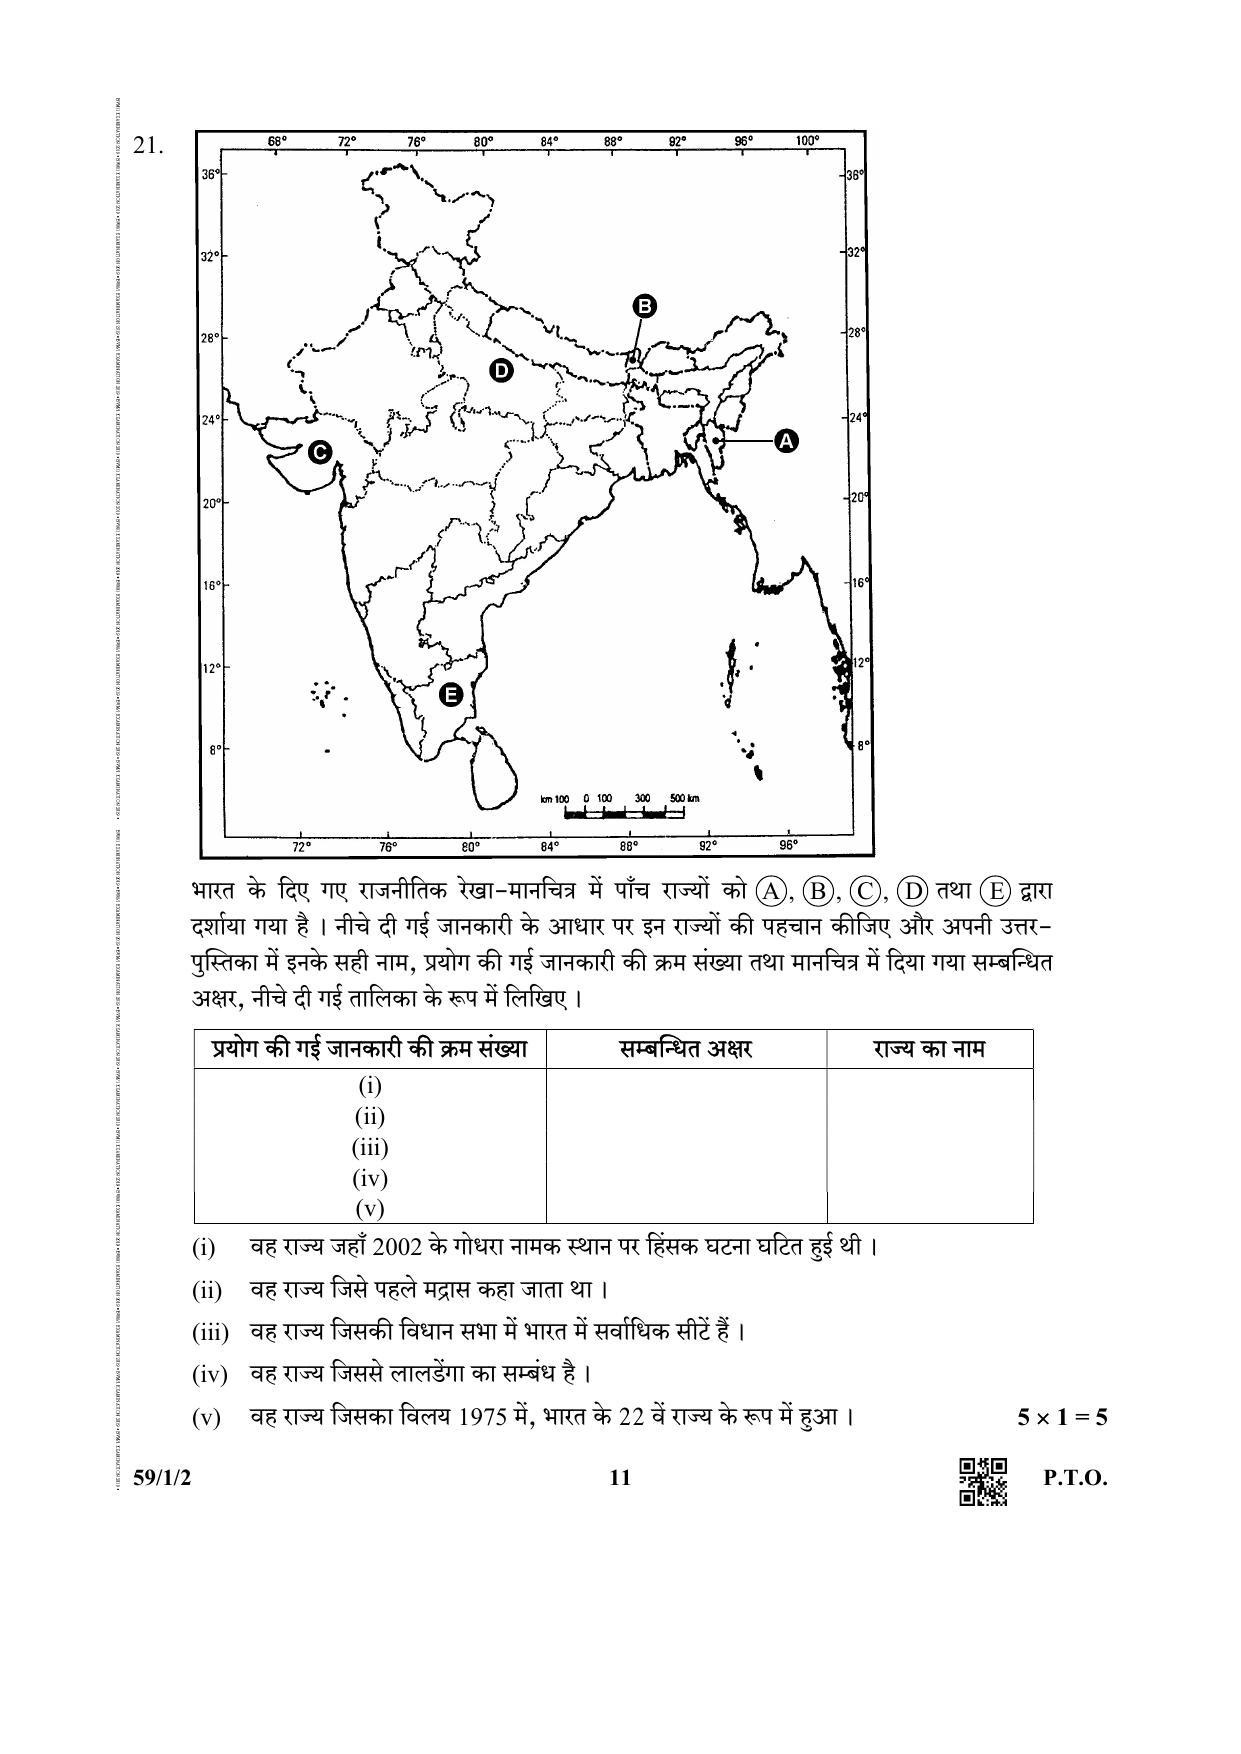 CBSE Class 12 59-1-2 (Political Science) 2019 Question Paper - Page 11